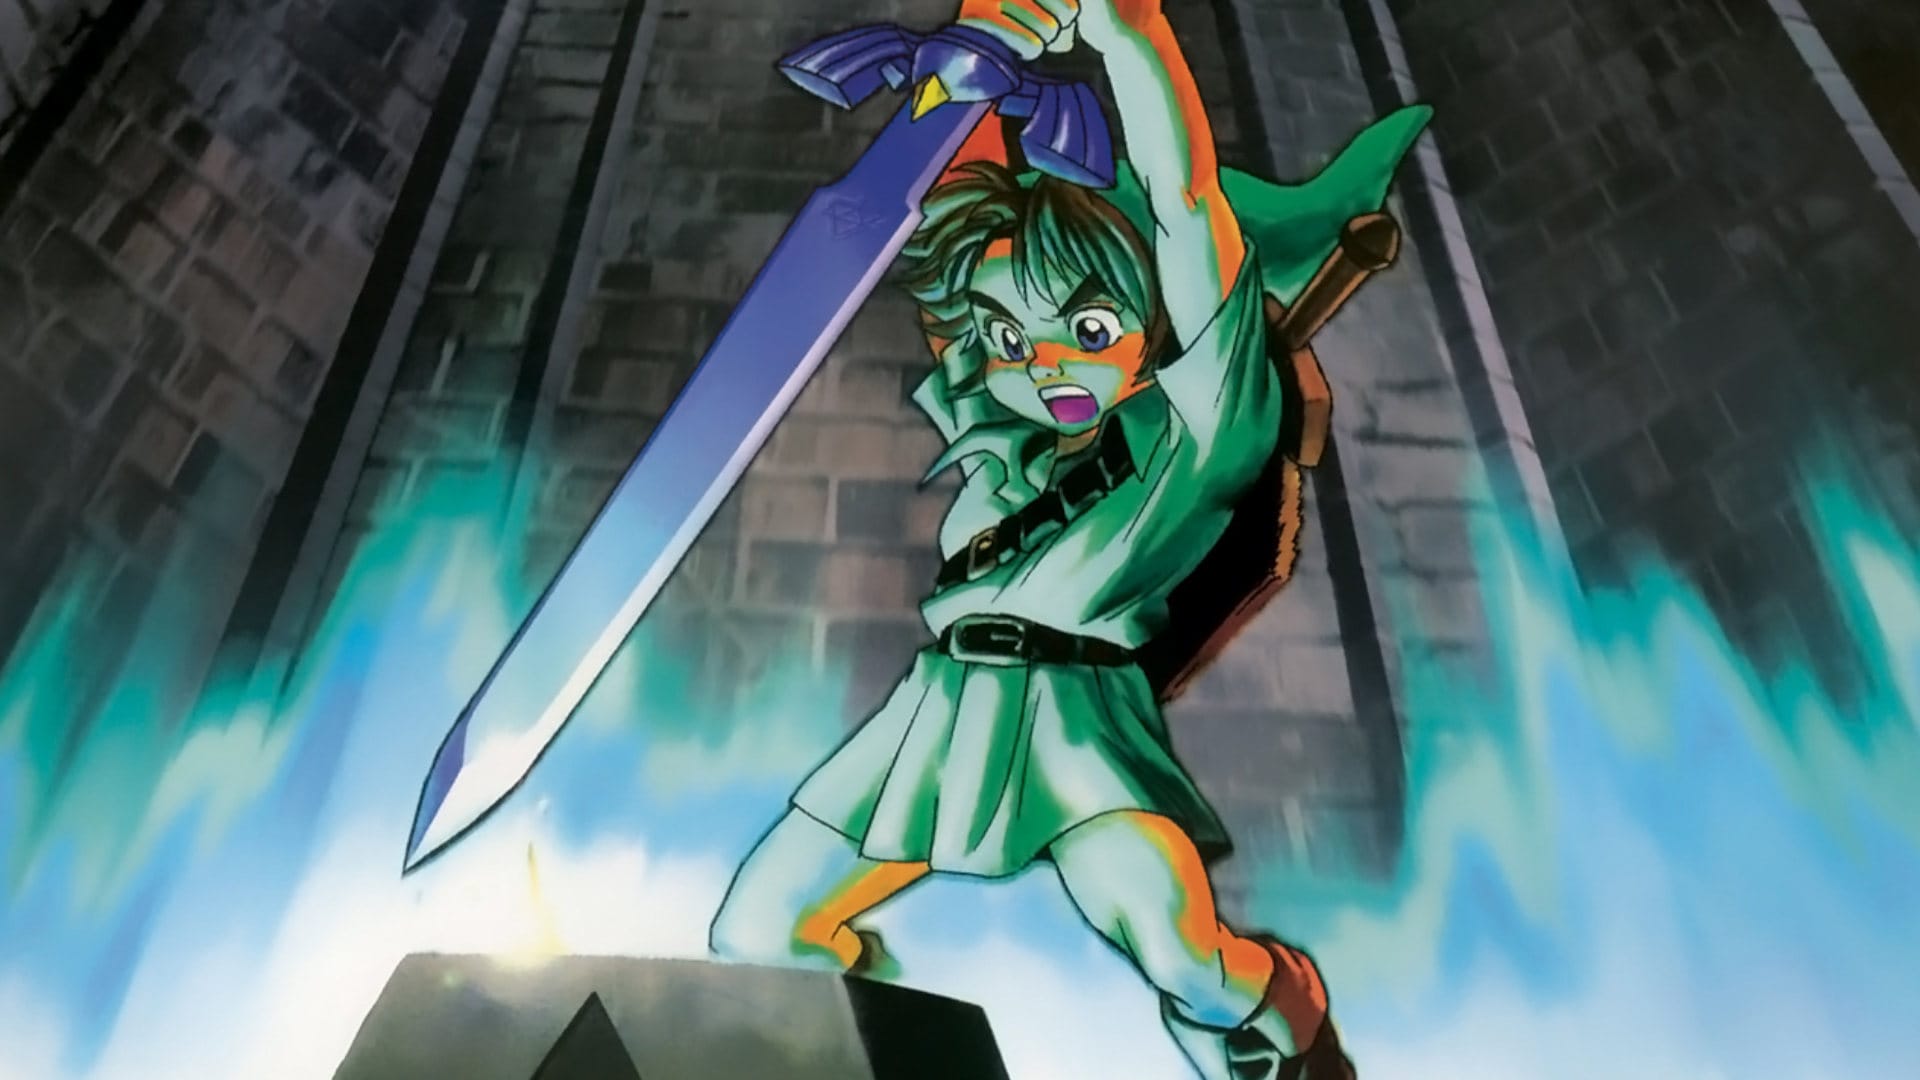 Ocarina Of Time Is No Longer The Best-Rated Video Game Ever Made